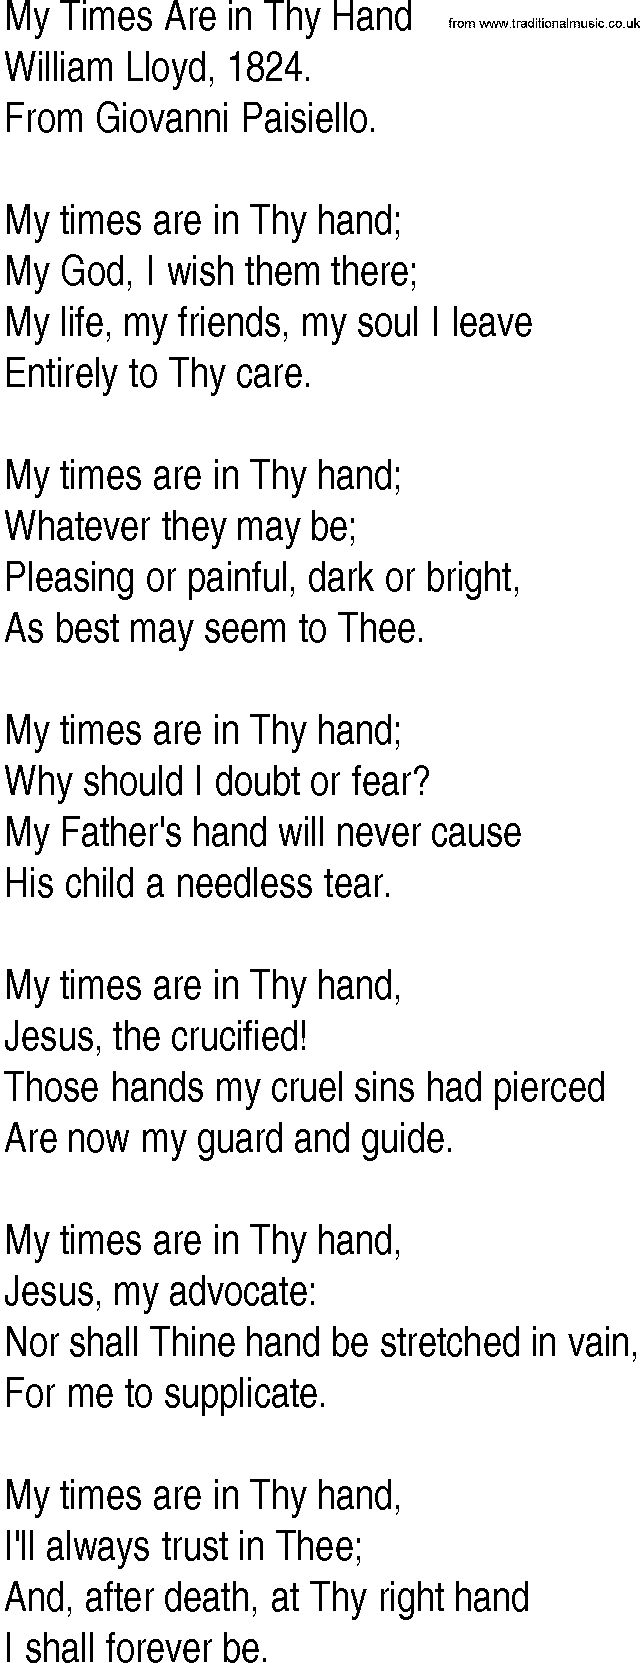 Hymn and Gospel Song: My Times Are in Thy Hand by William Lloyd lyrics